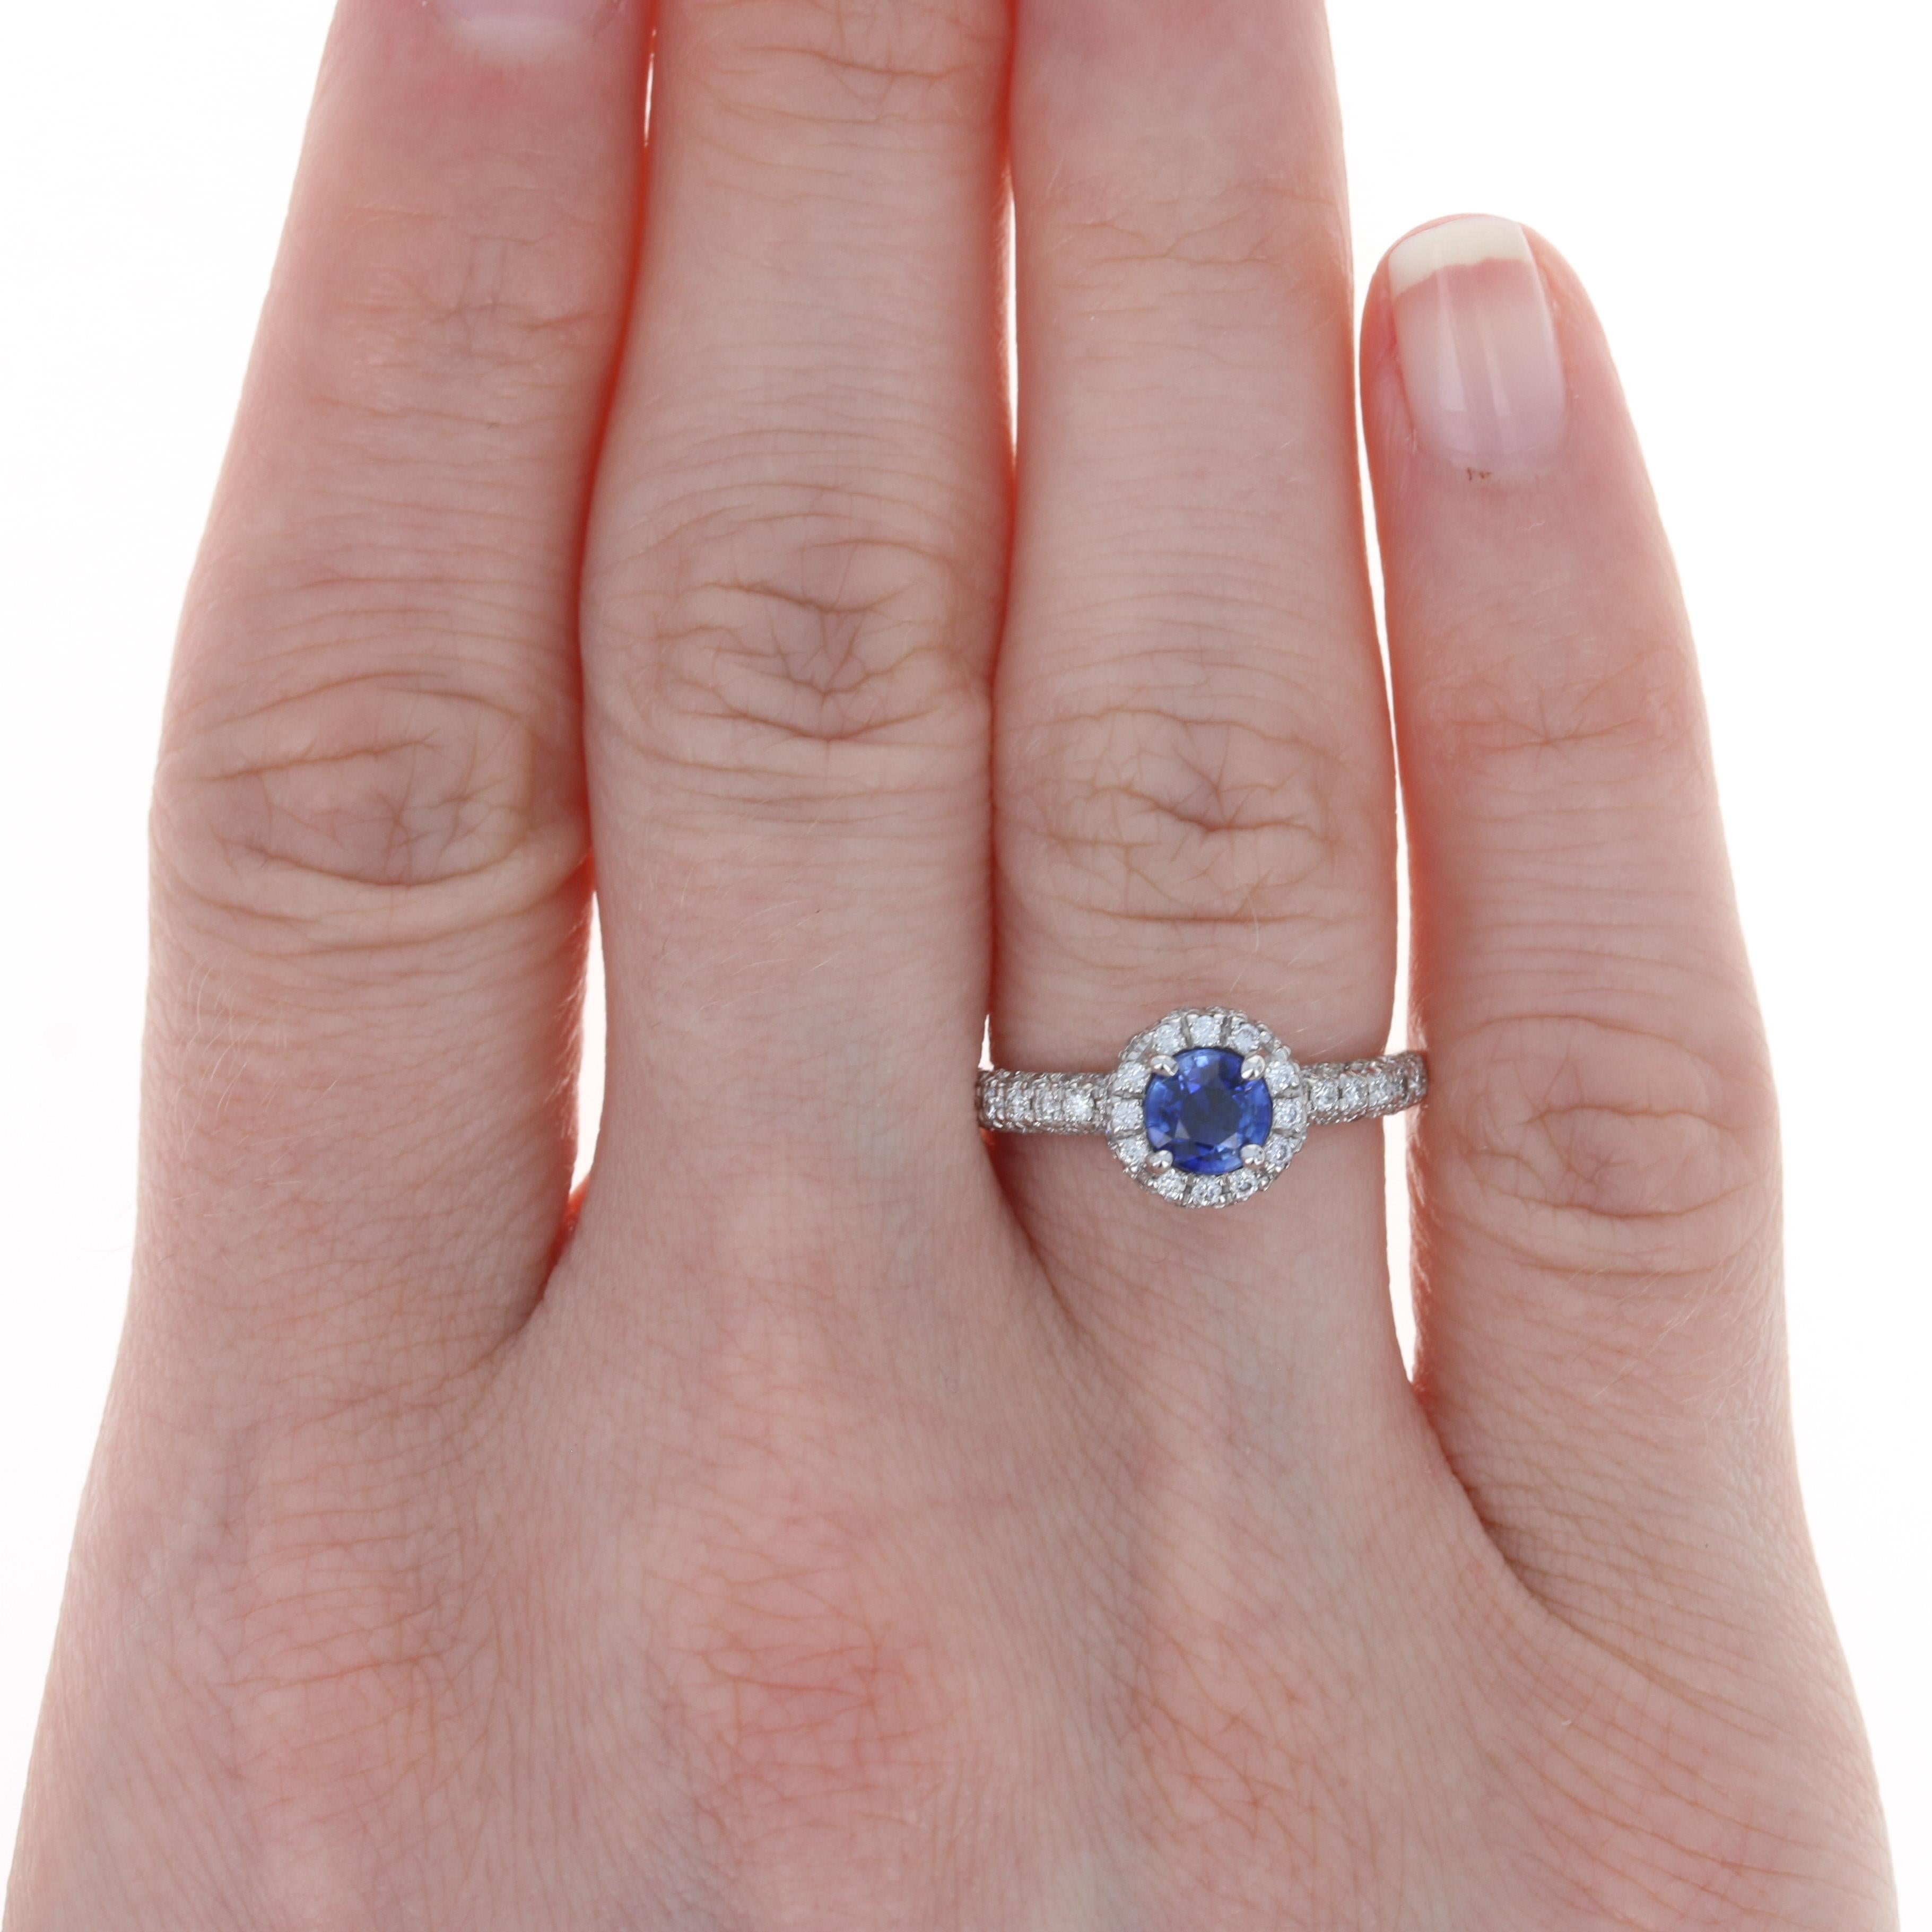 Size: 5 1/4
Sizing Fee: Up 1 size for $30

Metal Content: 14k White Gold 

Stone Information: 
Natural Sapphire
Treatment: Heating 
Carat: .71ct (weighed)
Cut: Round 
Color: Blue 
Diameter: 5.1mm 

Natural Diamonds
Carats: .72ctw
Cut: Round